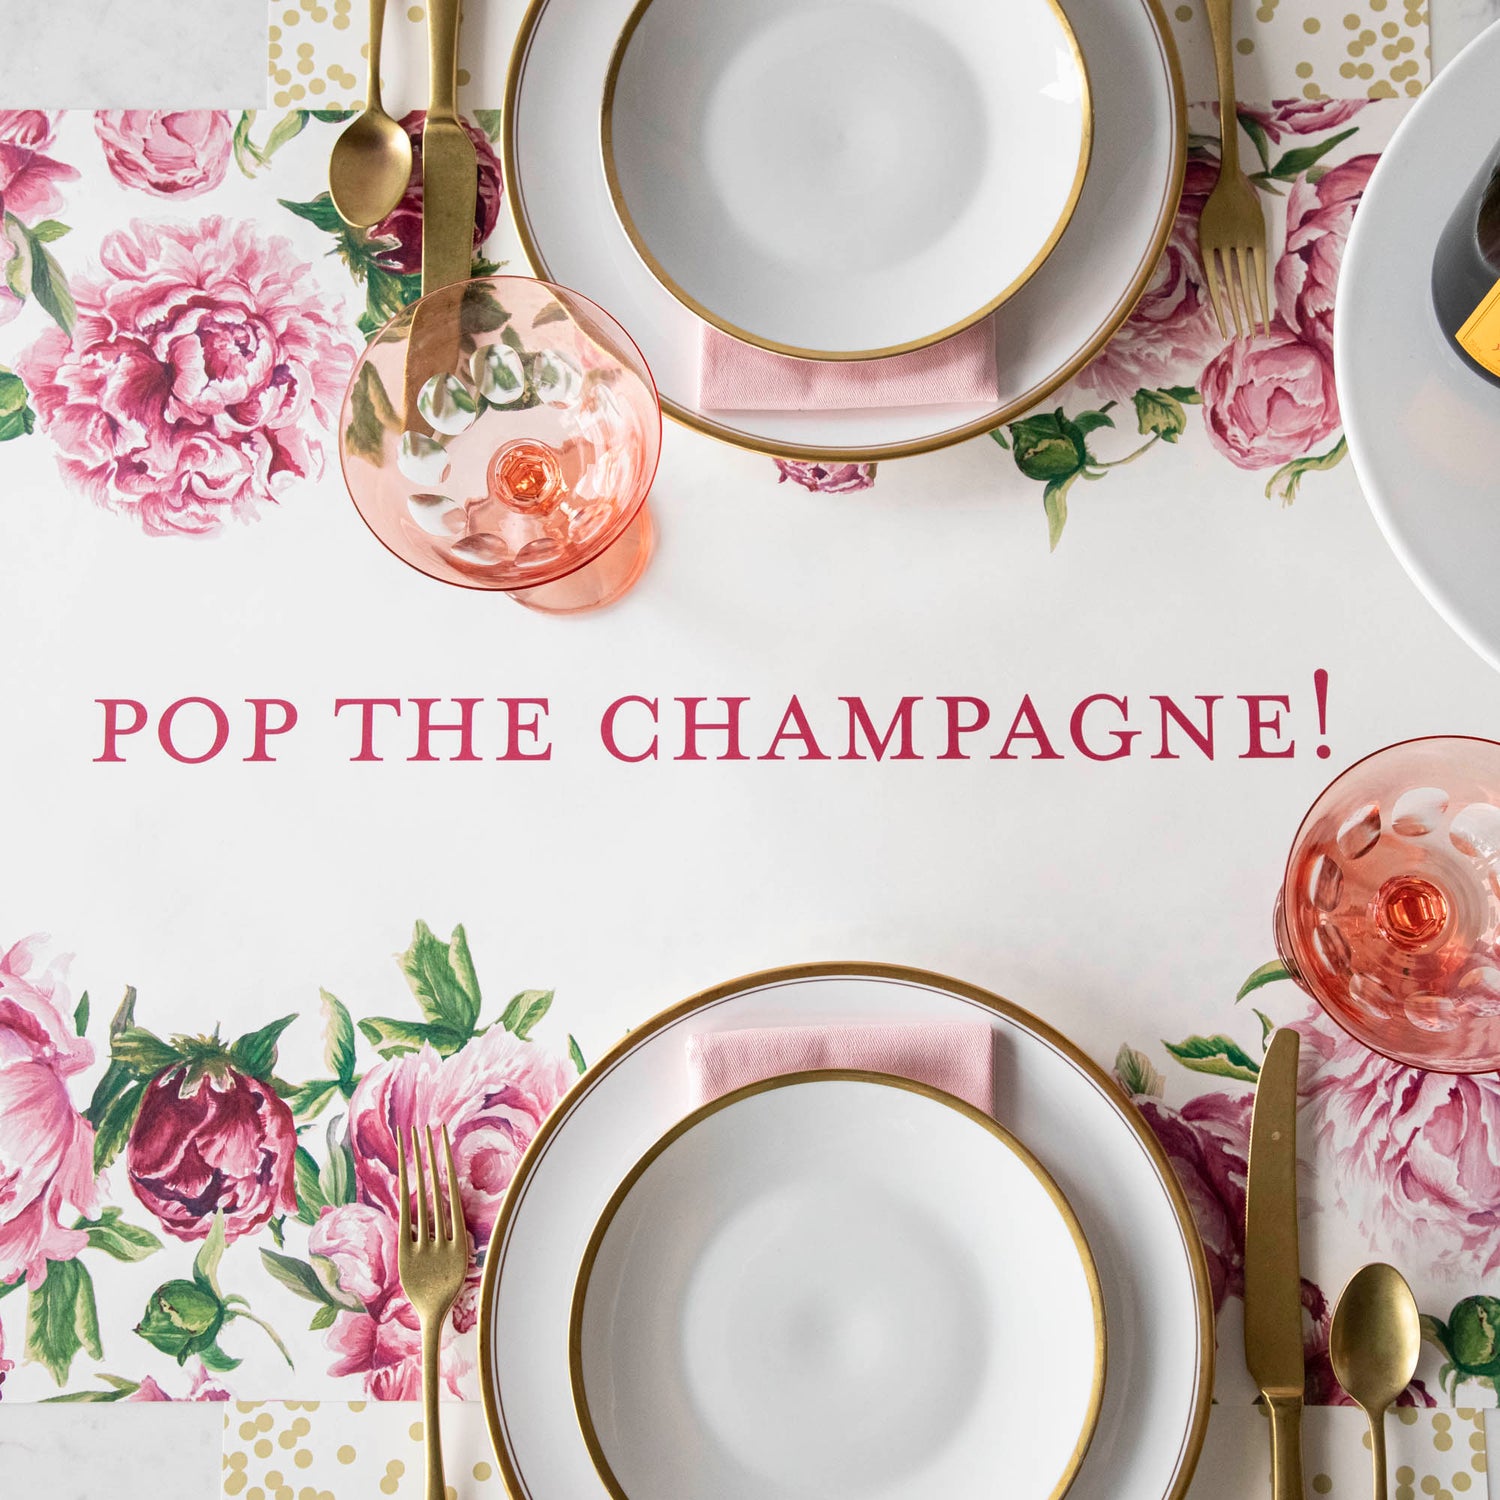 The Peony Personalized Runner, with &quot;POP THE CHAMPAGNE!&quot; printed down the middle in dark pink, under an elegant table setting.